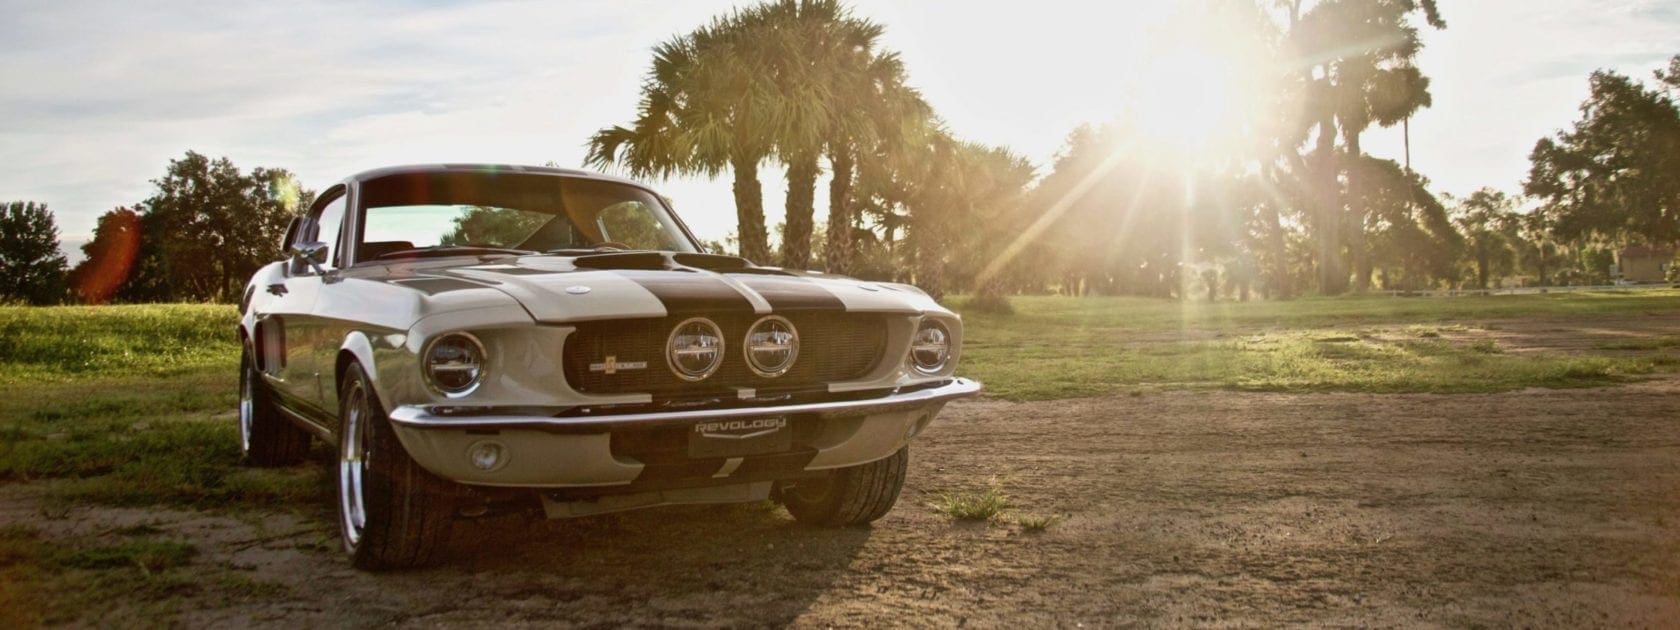 Revology’s classic Mustang has young blood but old soul